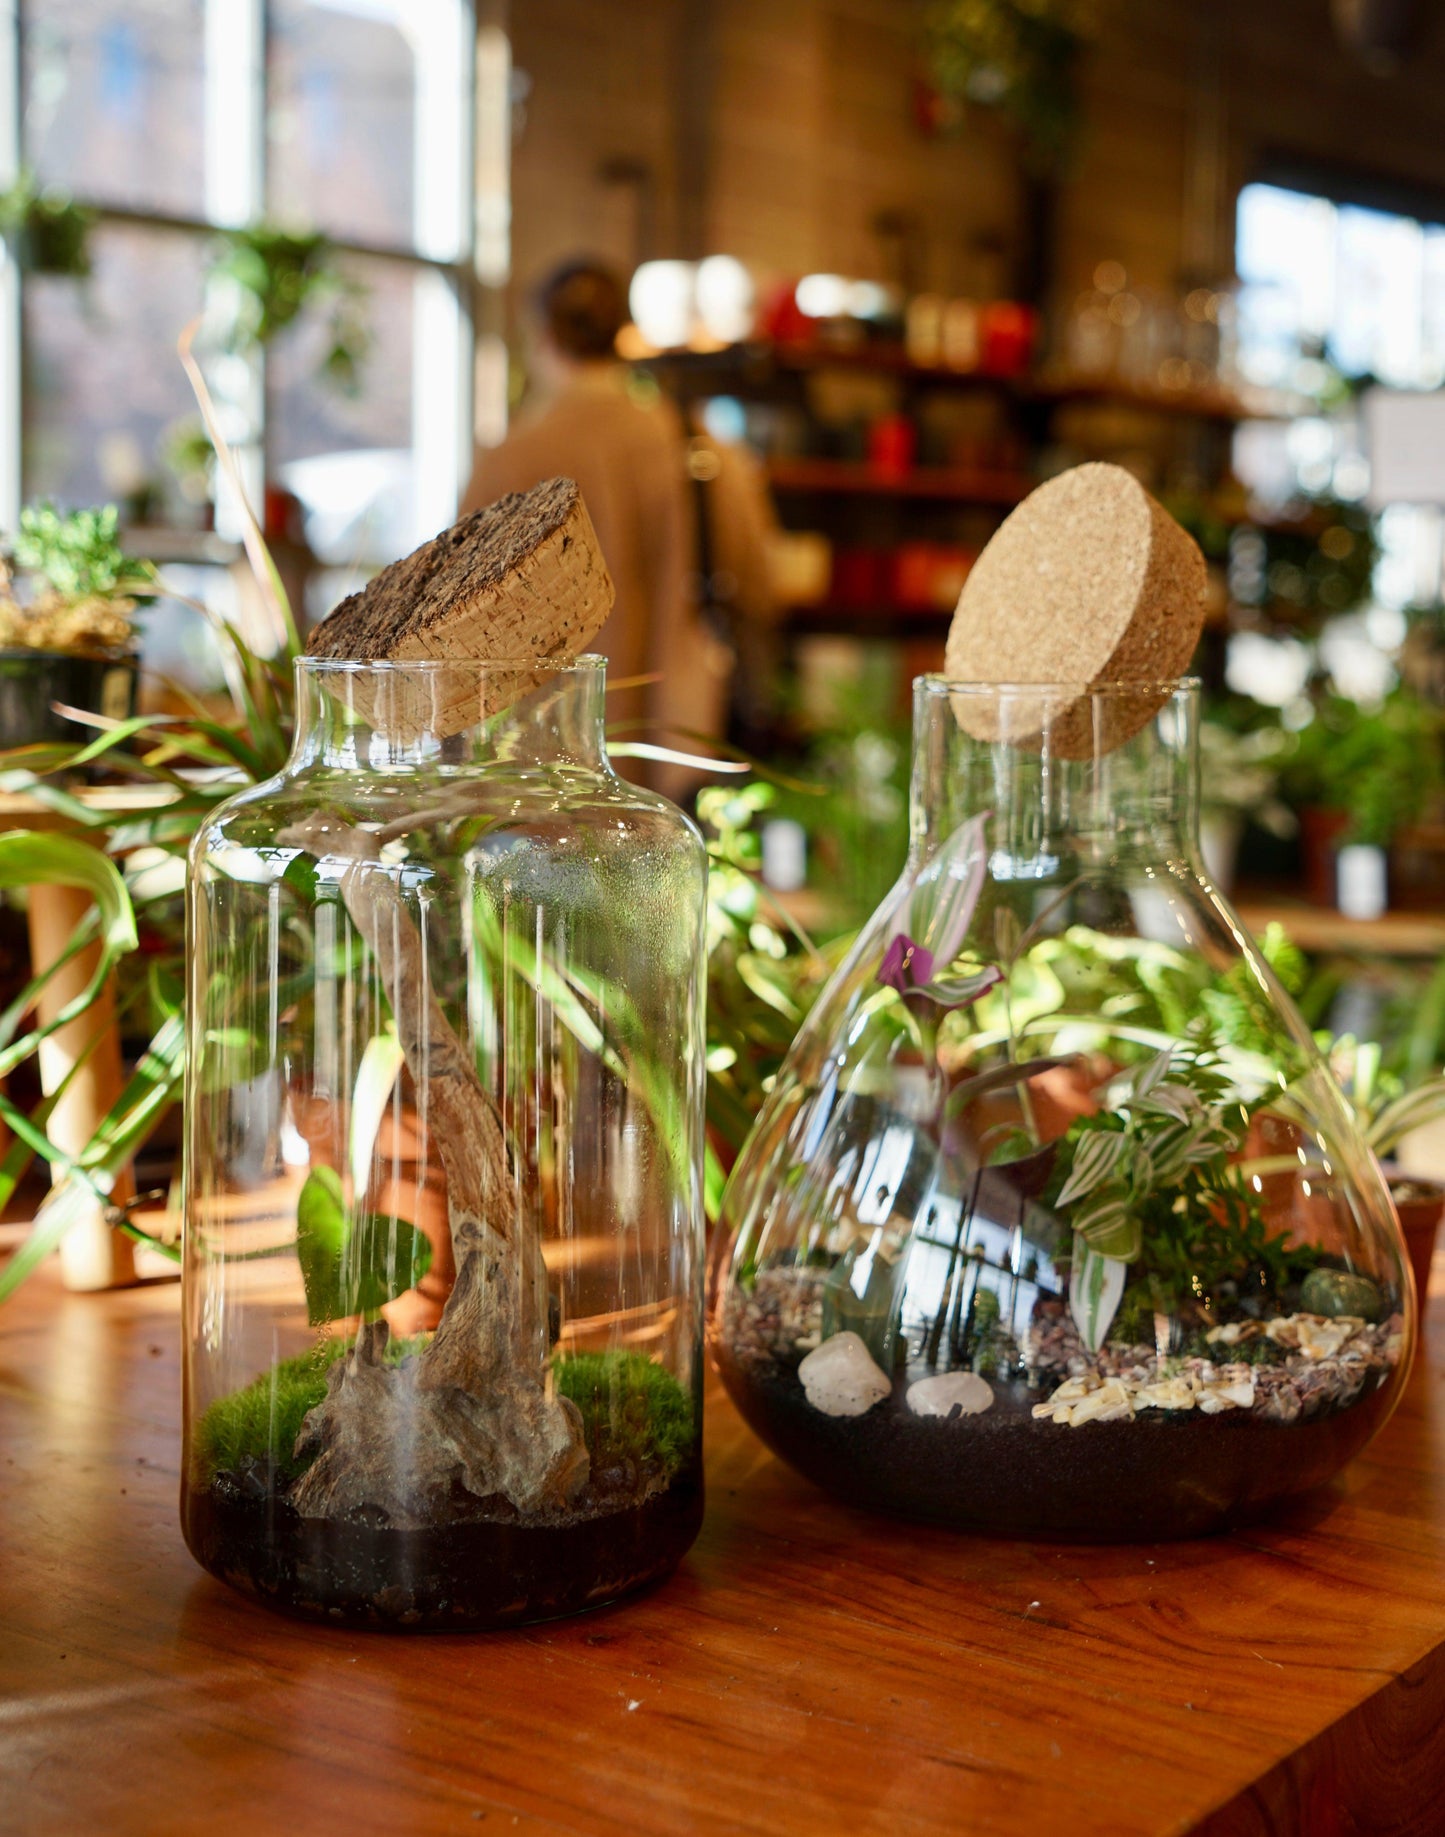 Date Night: Terrarium Building at Terracotta - Friday, May 31st